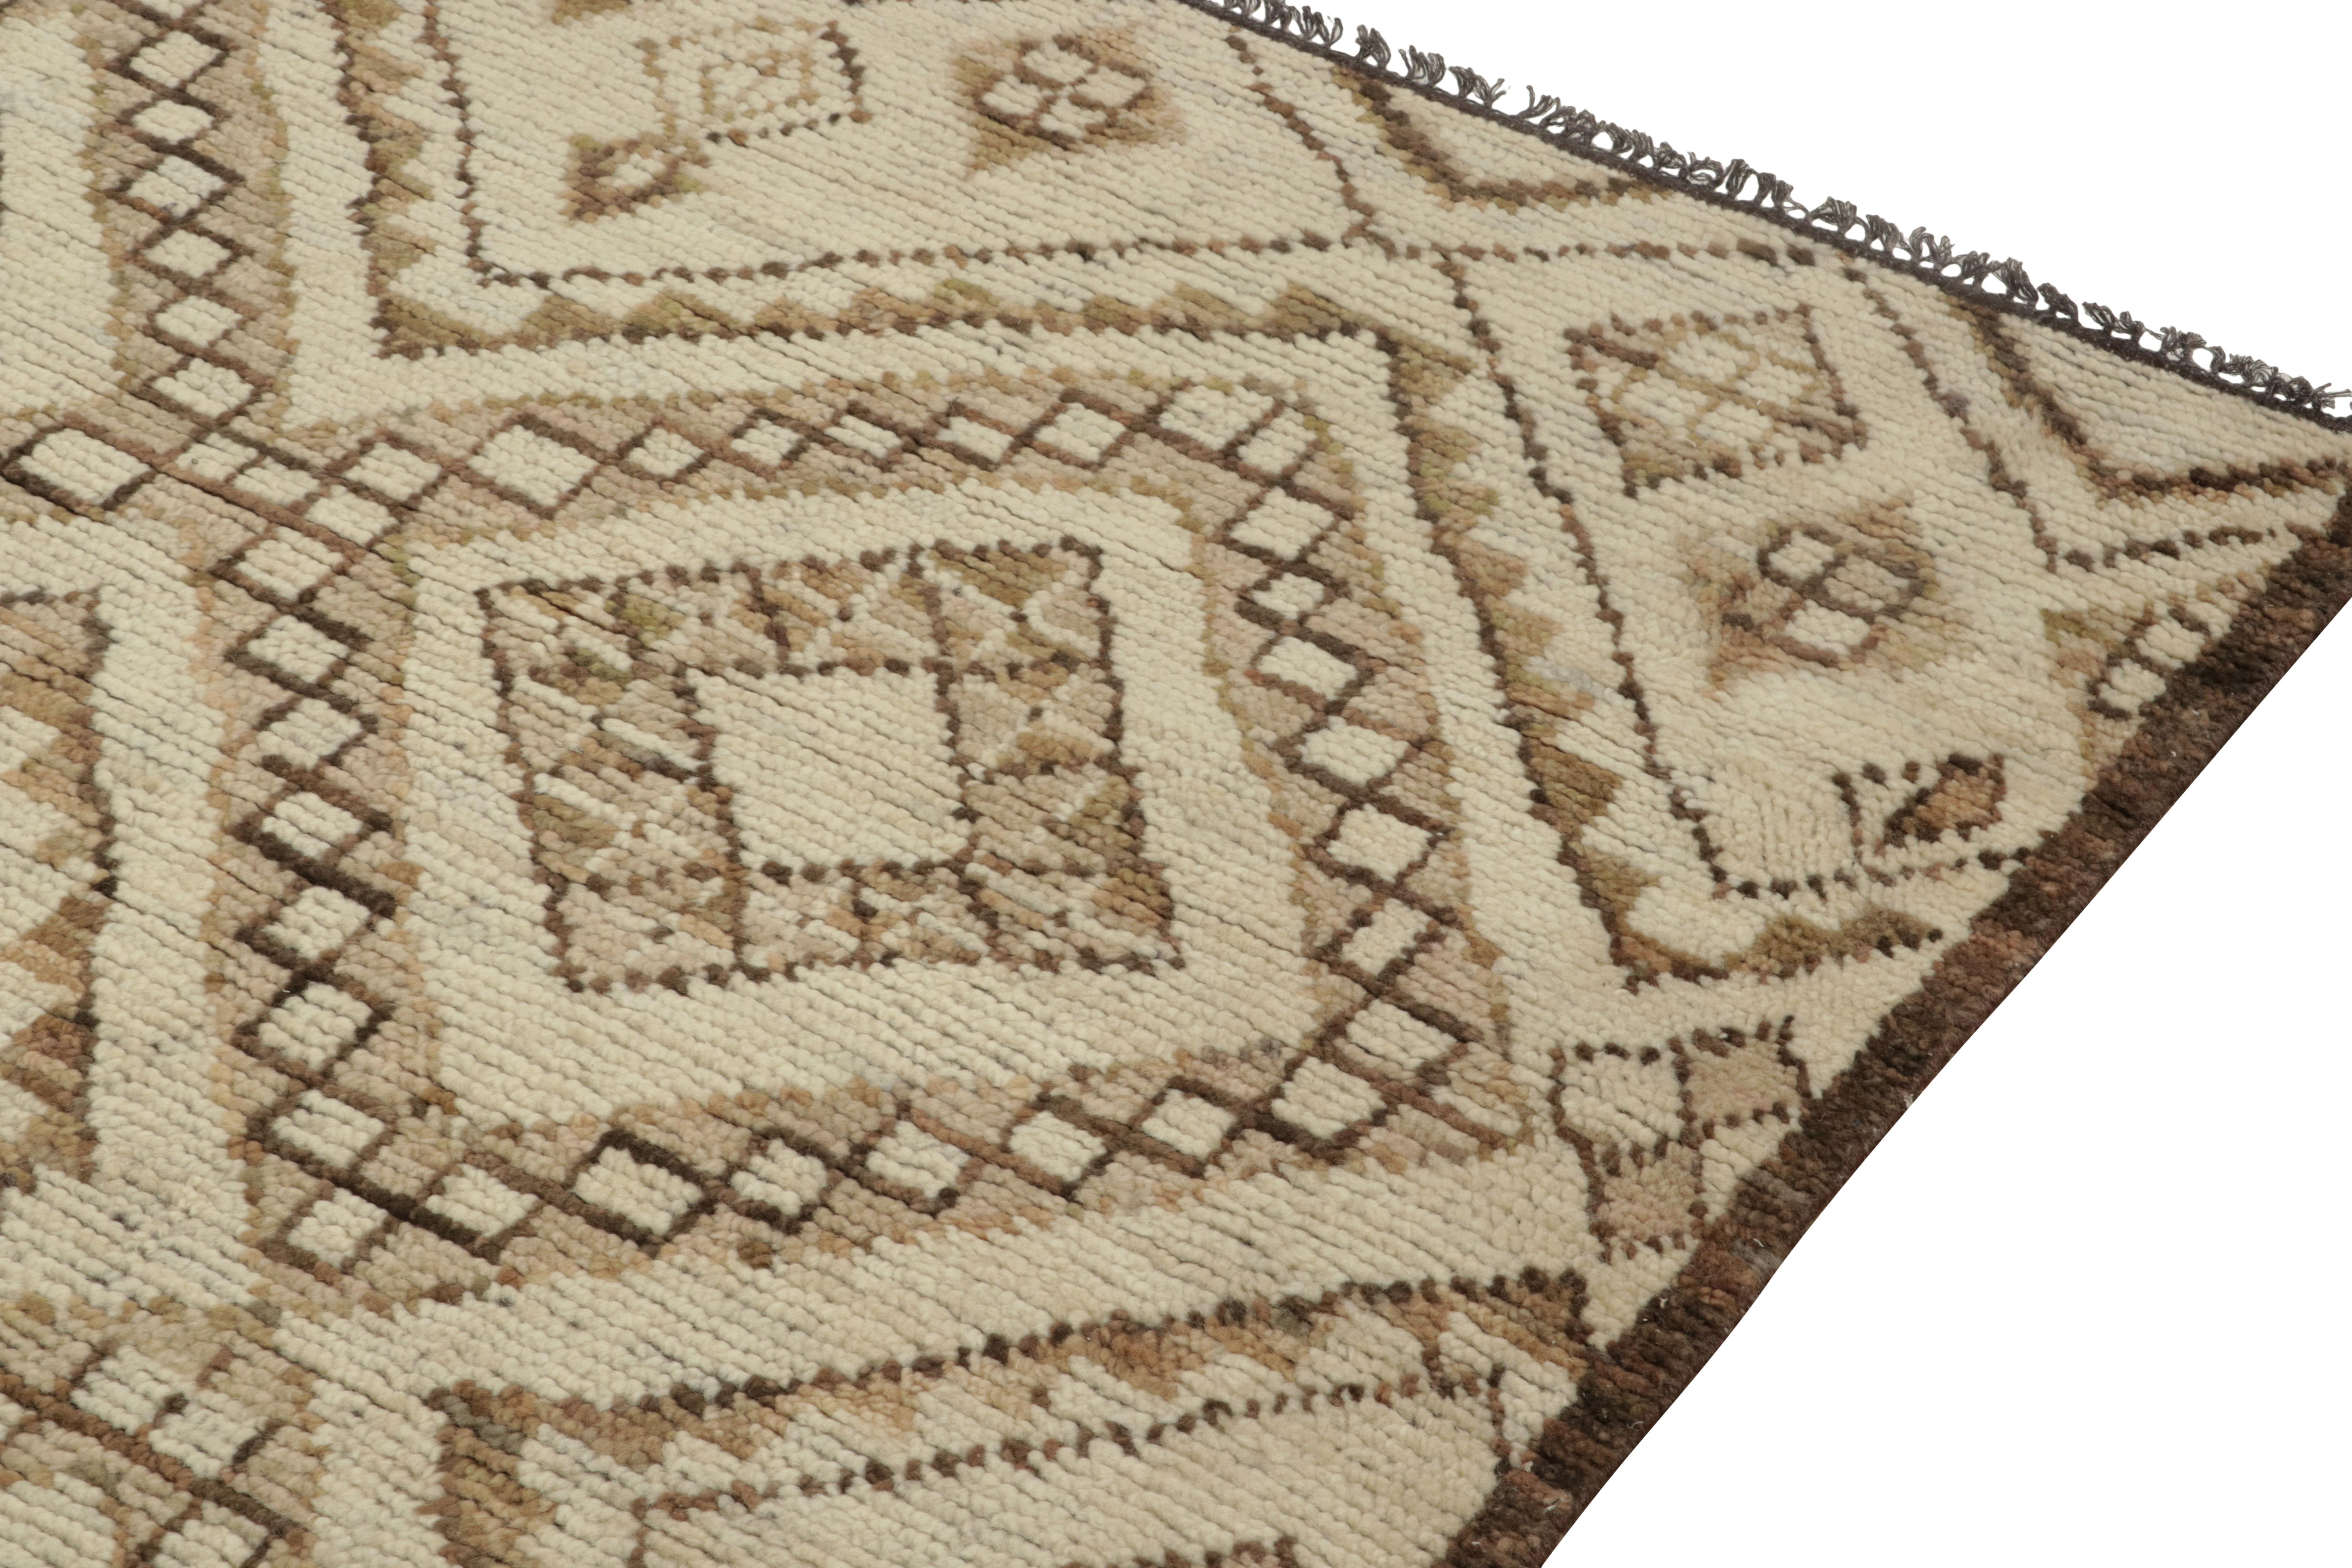 Rug & Kilim’s Moroccan Style Rug in Beige-Brown Tribal Geometric Patterns In New Condition For Sale In Long Island City, NY